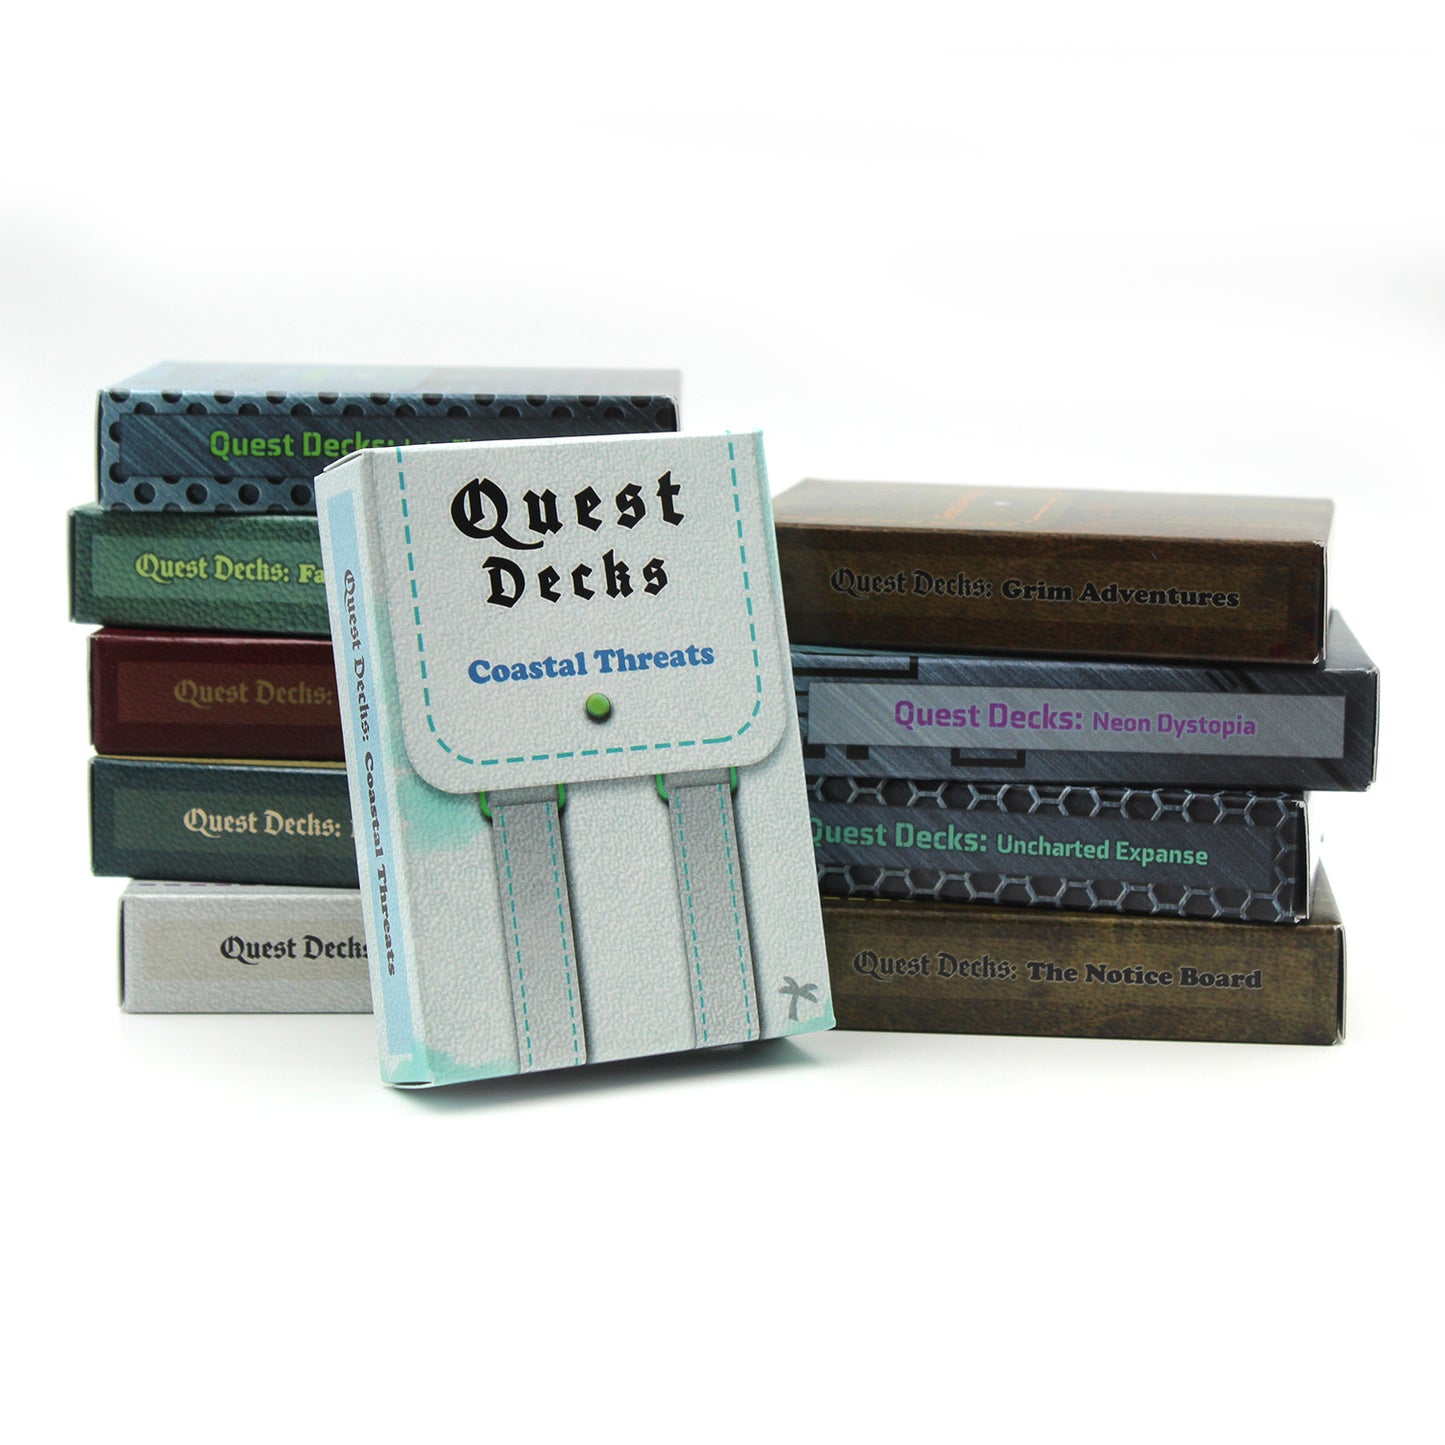 Quest Decks 10 Pack (With Case)